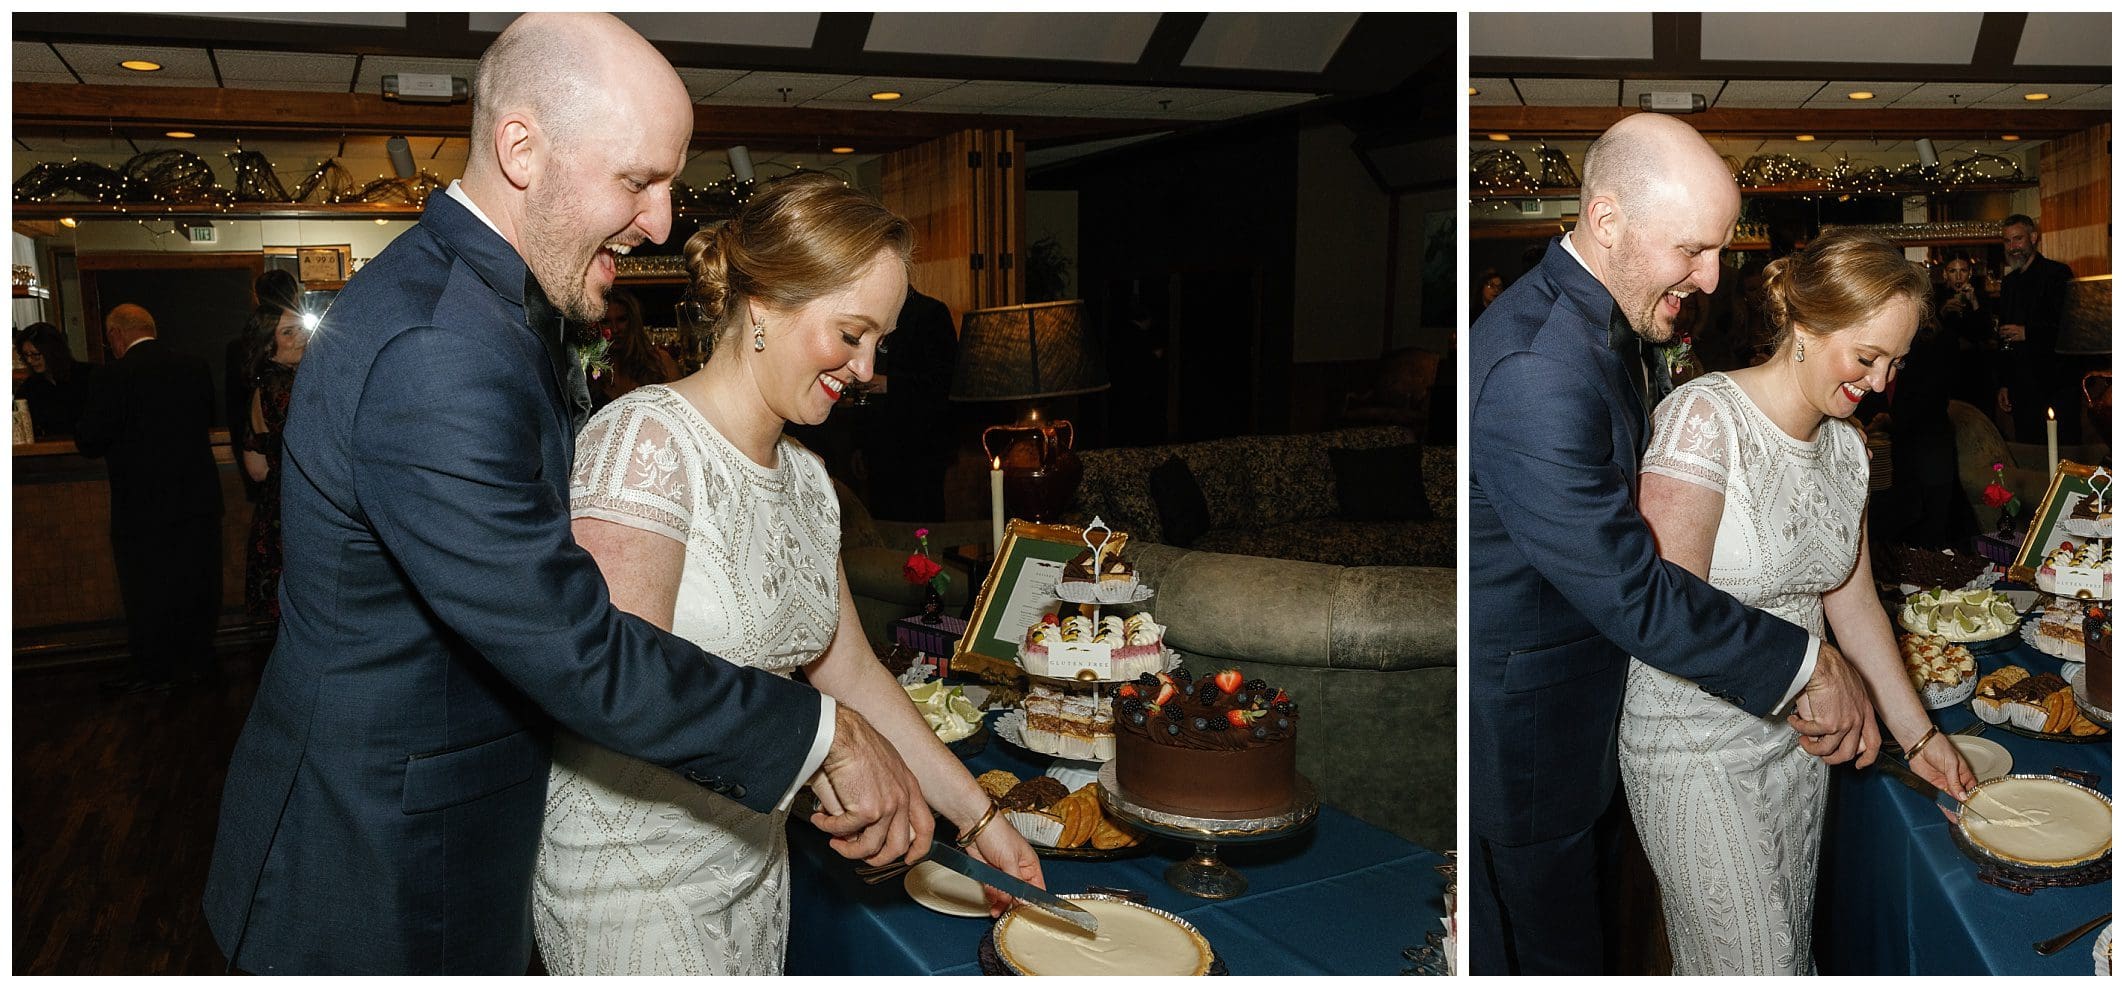 Two pictures of a bride and groom cutting a cake.